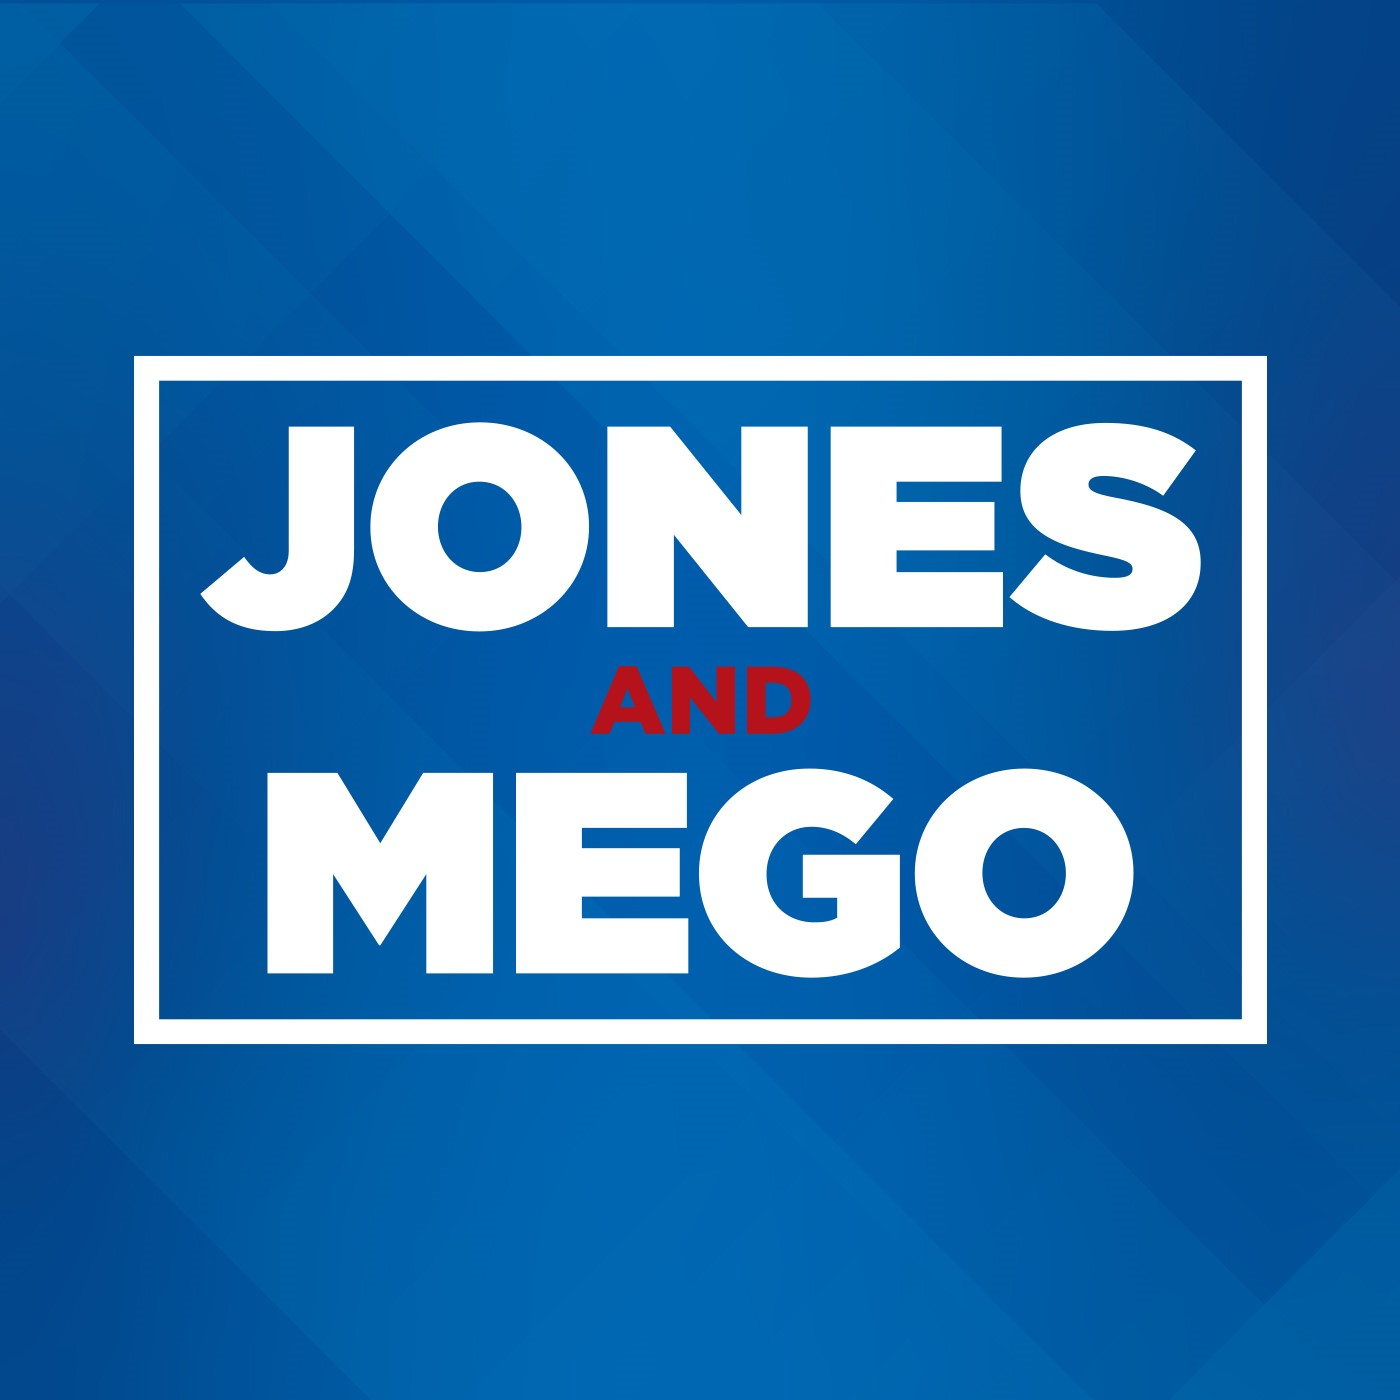 Patriots leaning towards a QB at three, Jones and Mego are happy